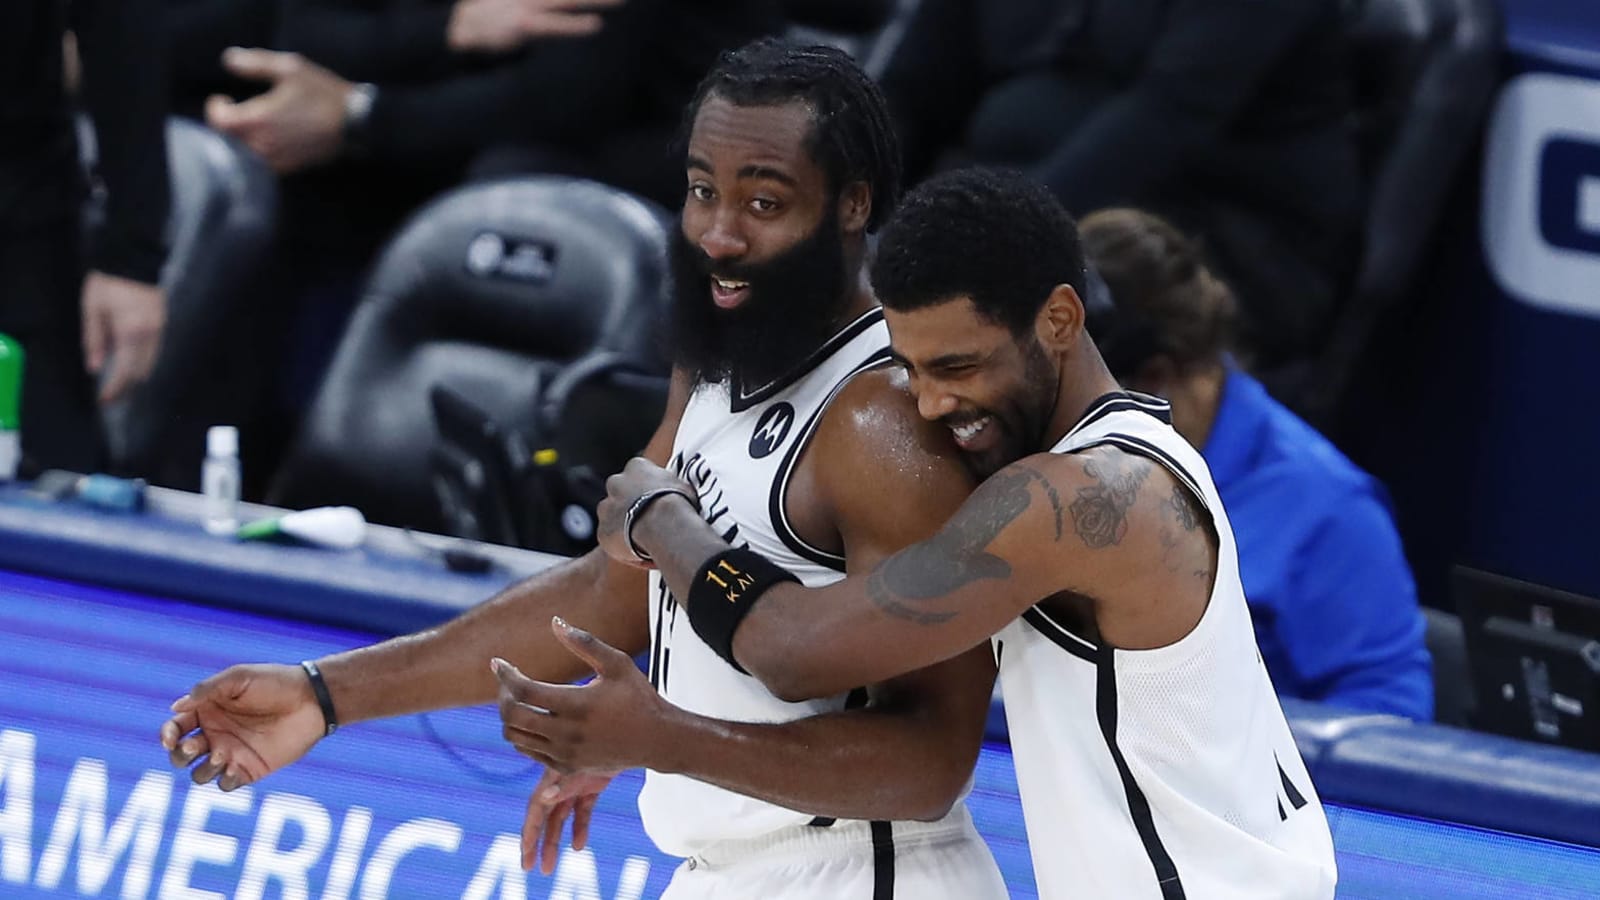 Kyrie to Harden: 'You're the point guard'